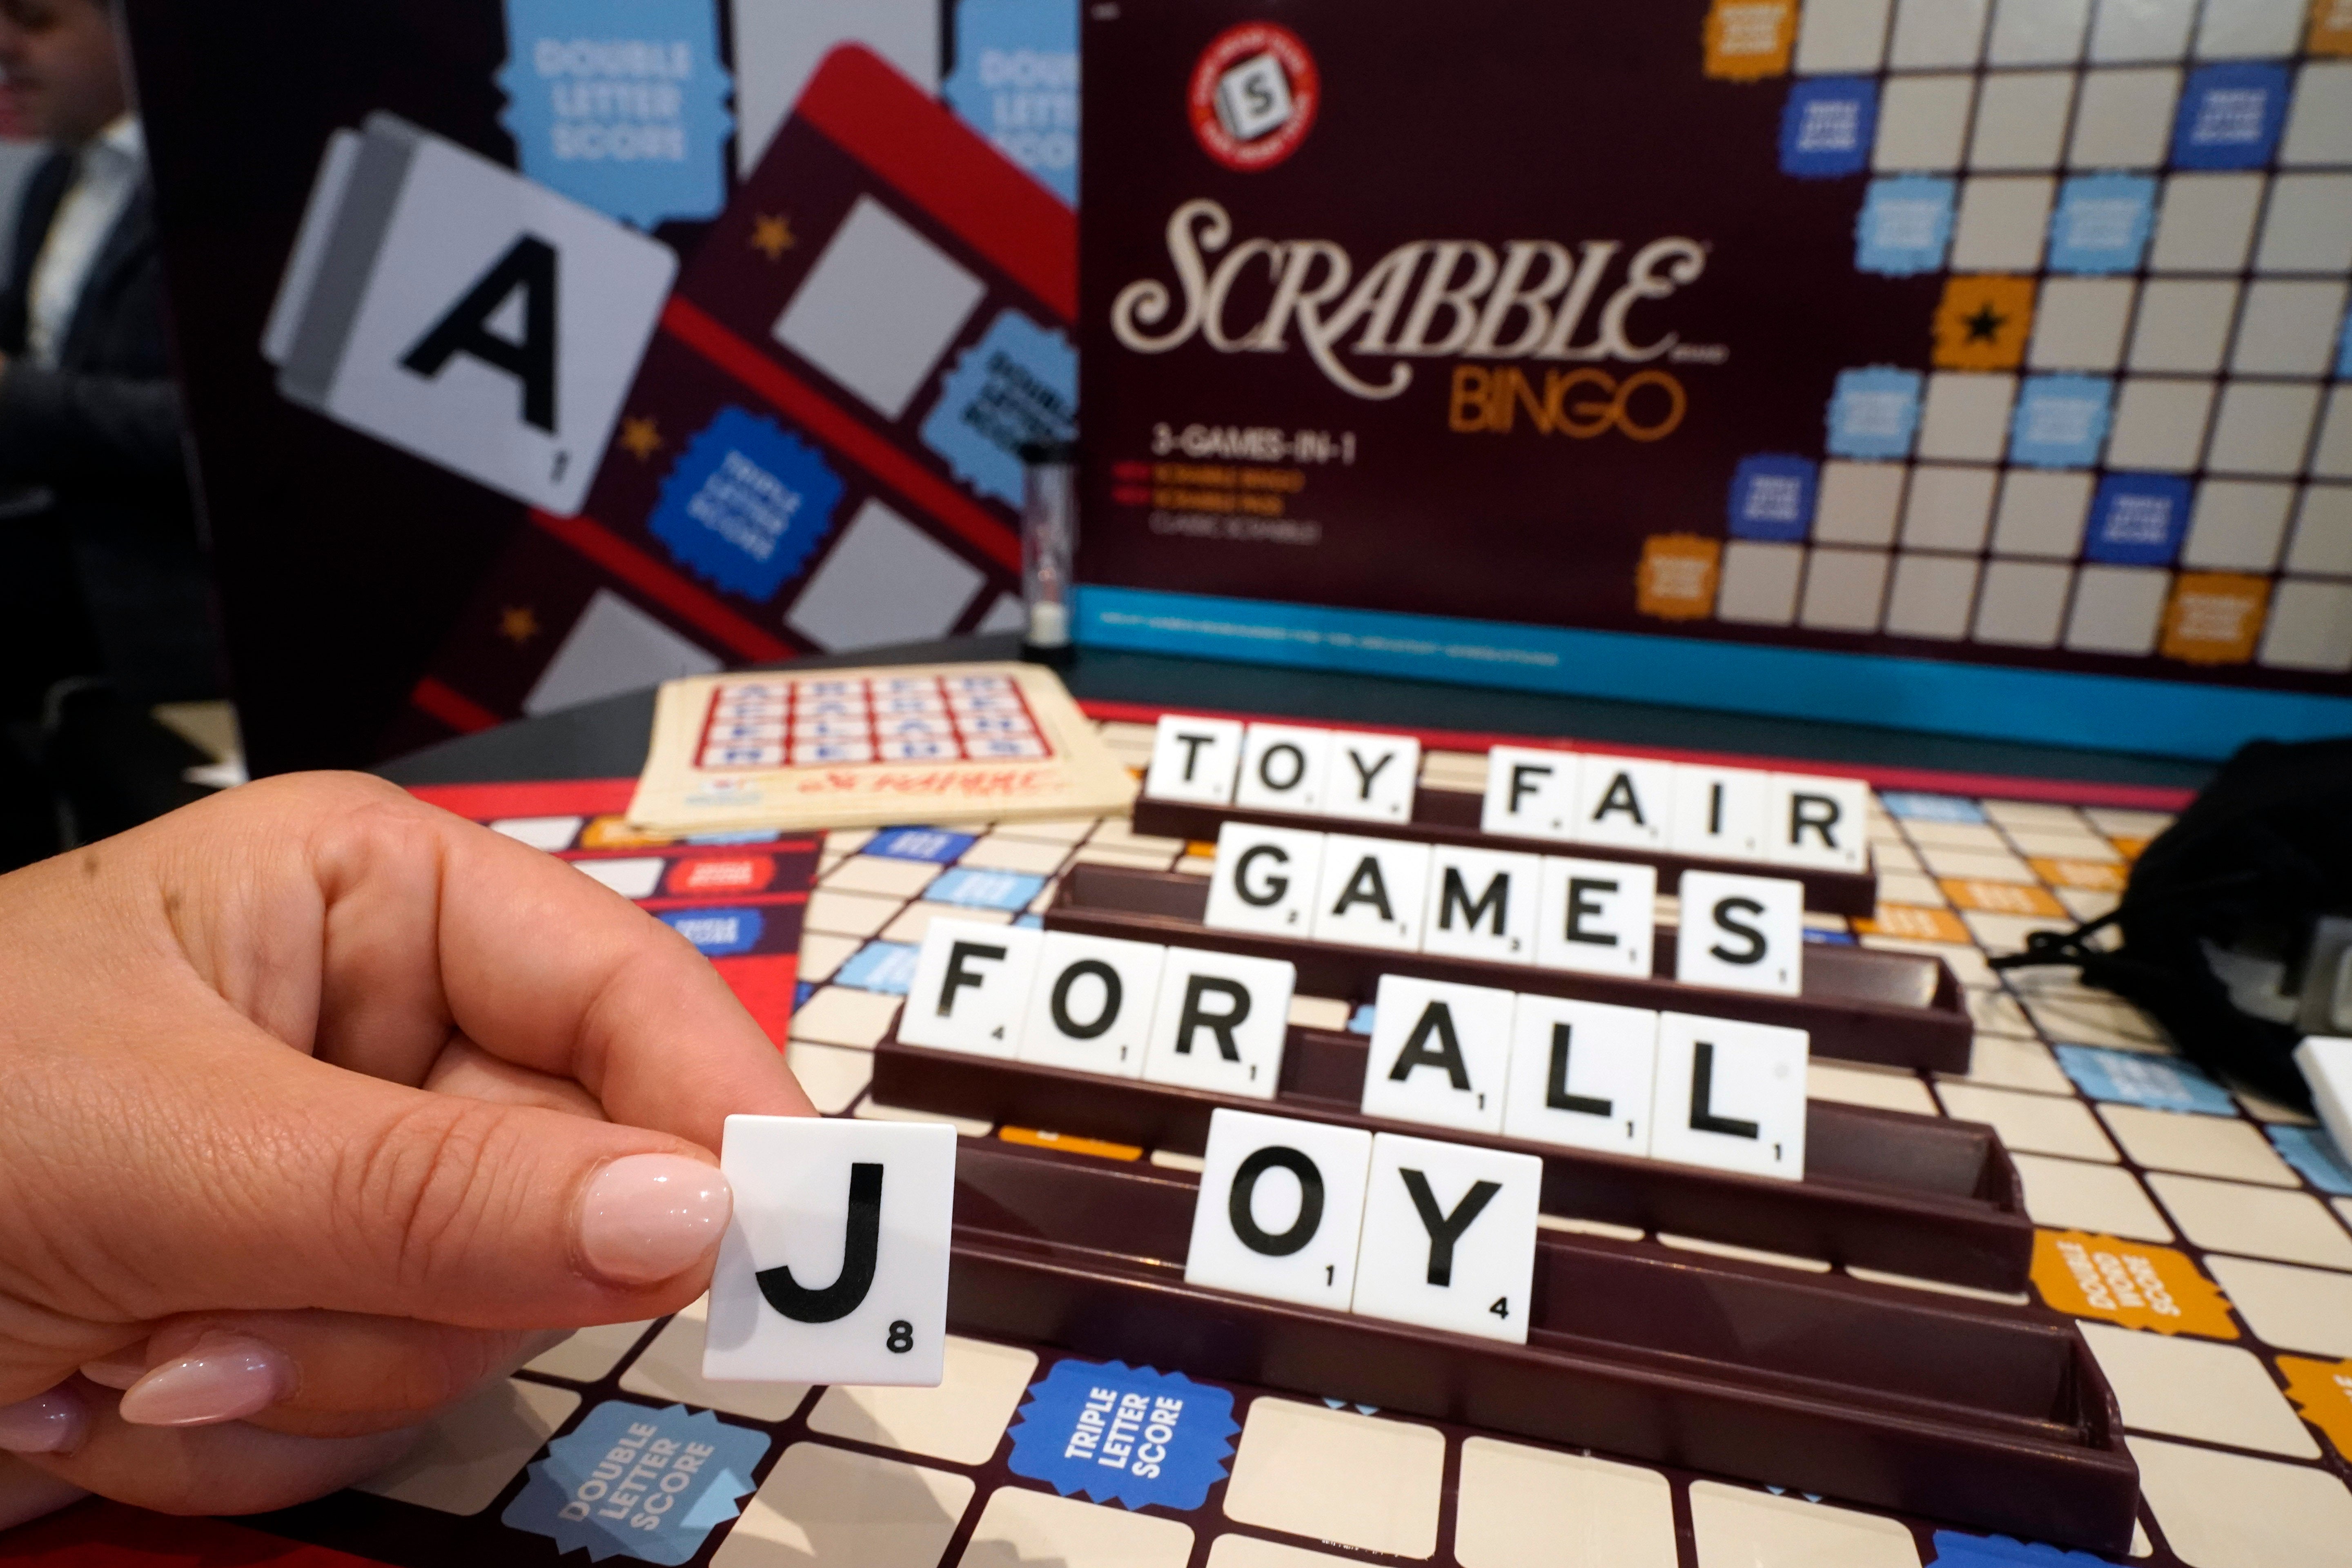 A Scrabble game with larger tiles is displayed at the 2023 Toy Fair, in New York’s Javits Center